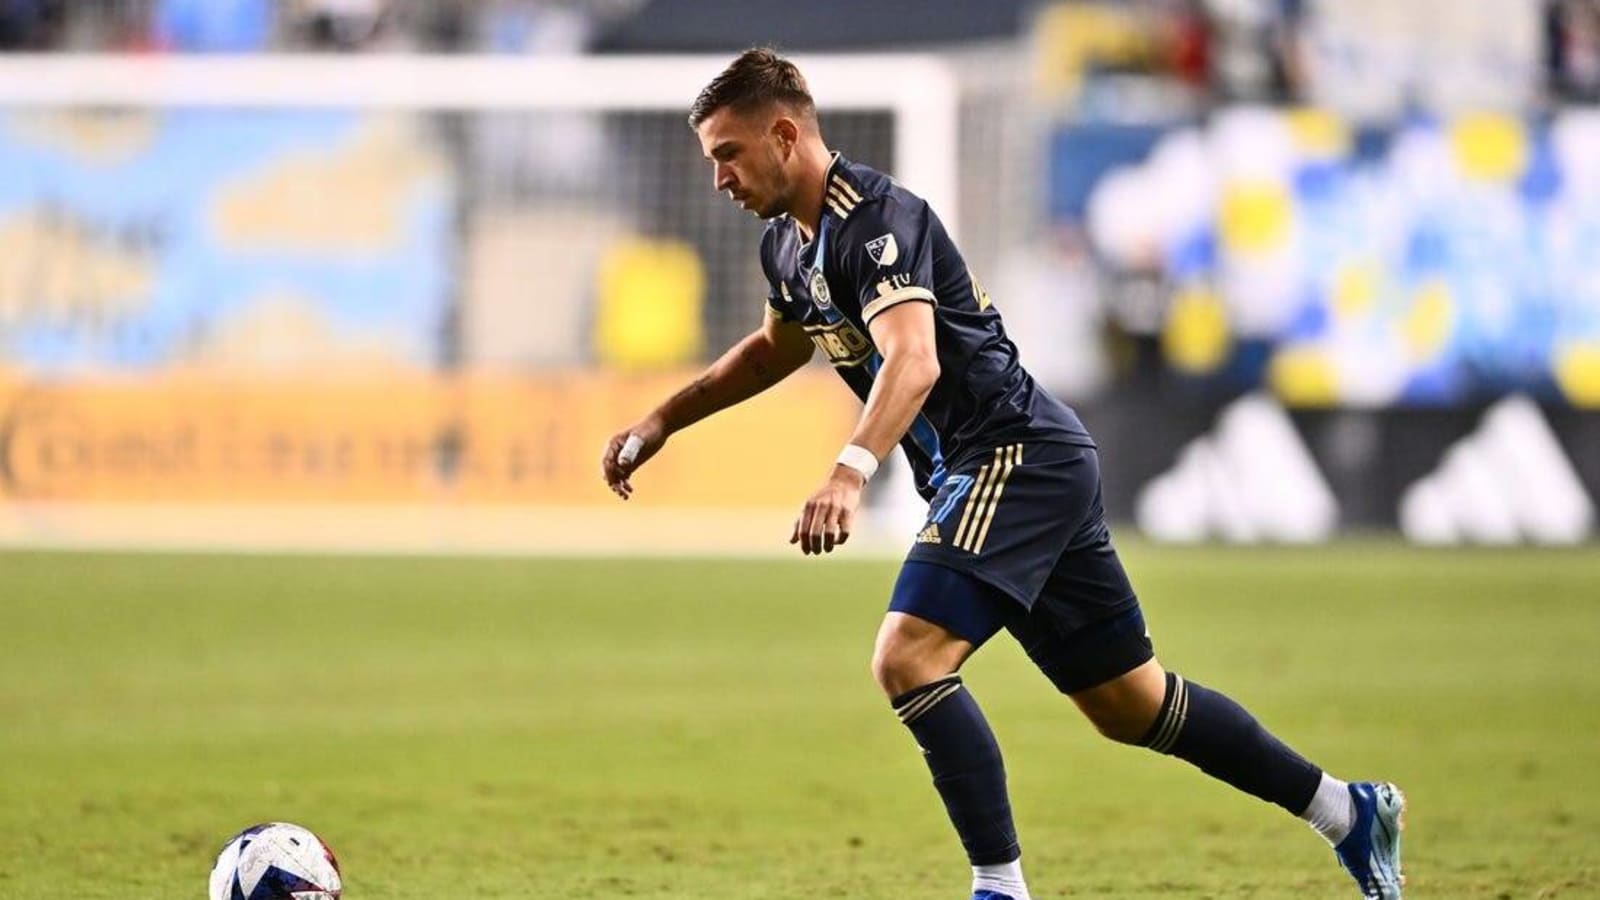 Union D Kai Wagner banned 3 games for racist language